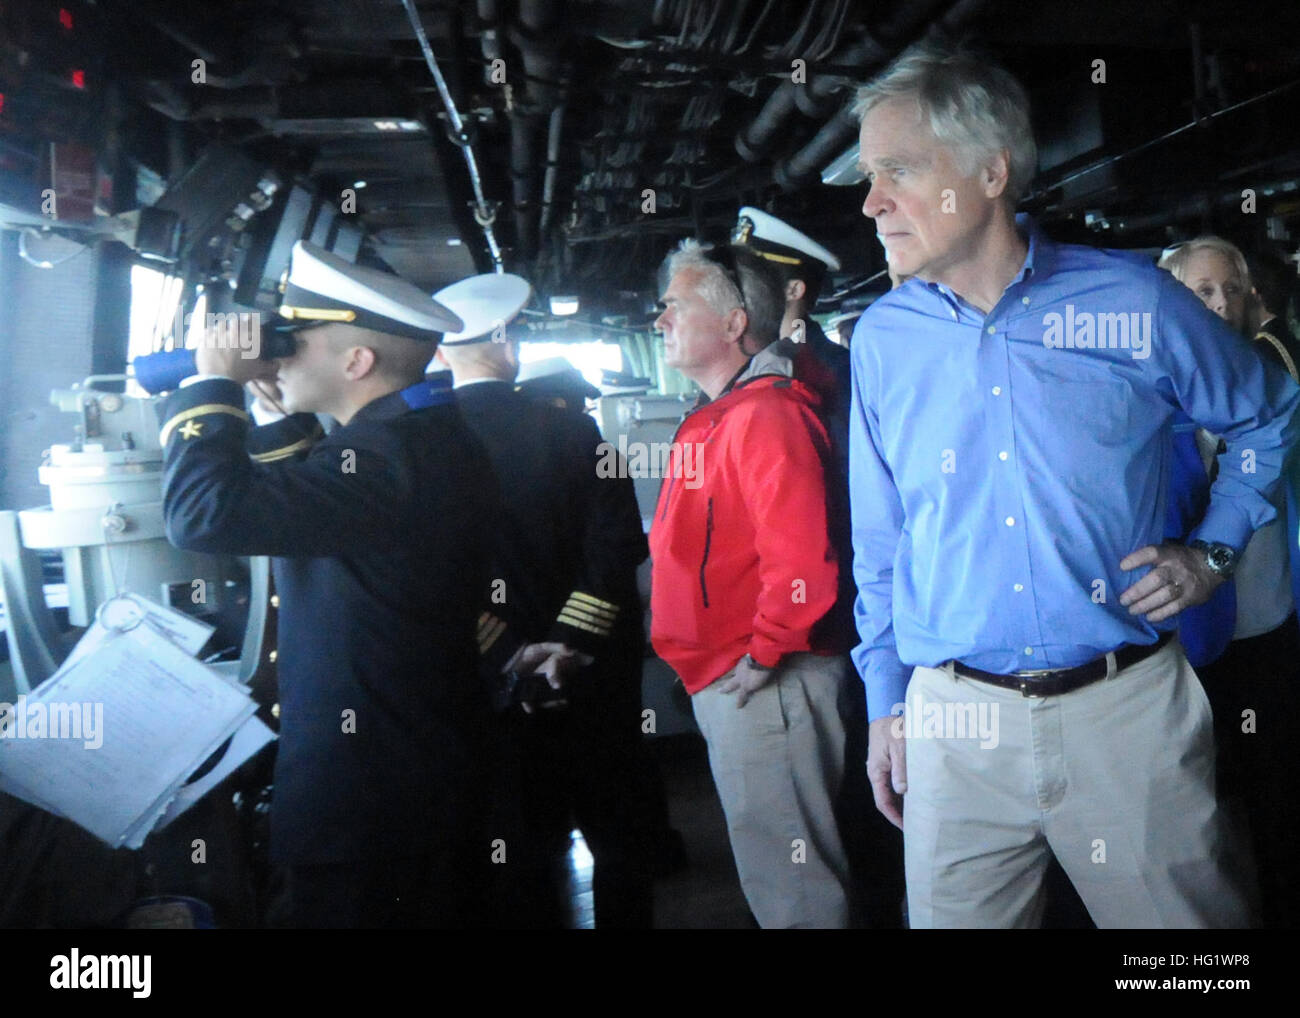 131206-N-ZO696-175 ATLANTIC OCEAN (Dec. 6, 2013)  U.S. Rep. Ander Crenshaw, from Florida,  tours the bridge of the amphibious transport dock ship USS New York (LPD 21) as the ship approaches Naval Station Mayport, the ship's new homeport. The homeport change is part of a larger move of the Iwo Jima Amphibious Ready Group homeport change in support of strategic dispersal and two viable East Coast surface ship homeports as well as the preservation of the ship repair industrial base in those areas. (U.S. Navy photo by Mass Communication Specialist 1st Class Phil Beaufort/Released) USS New York to Stock Photo